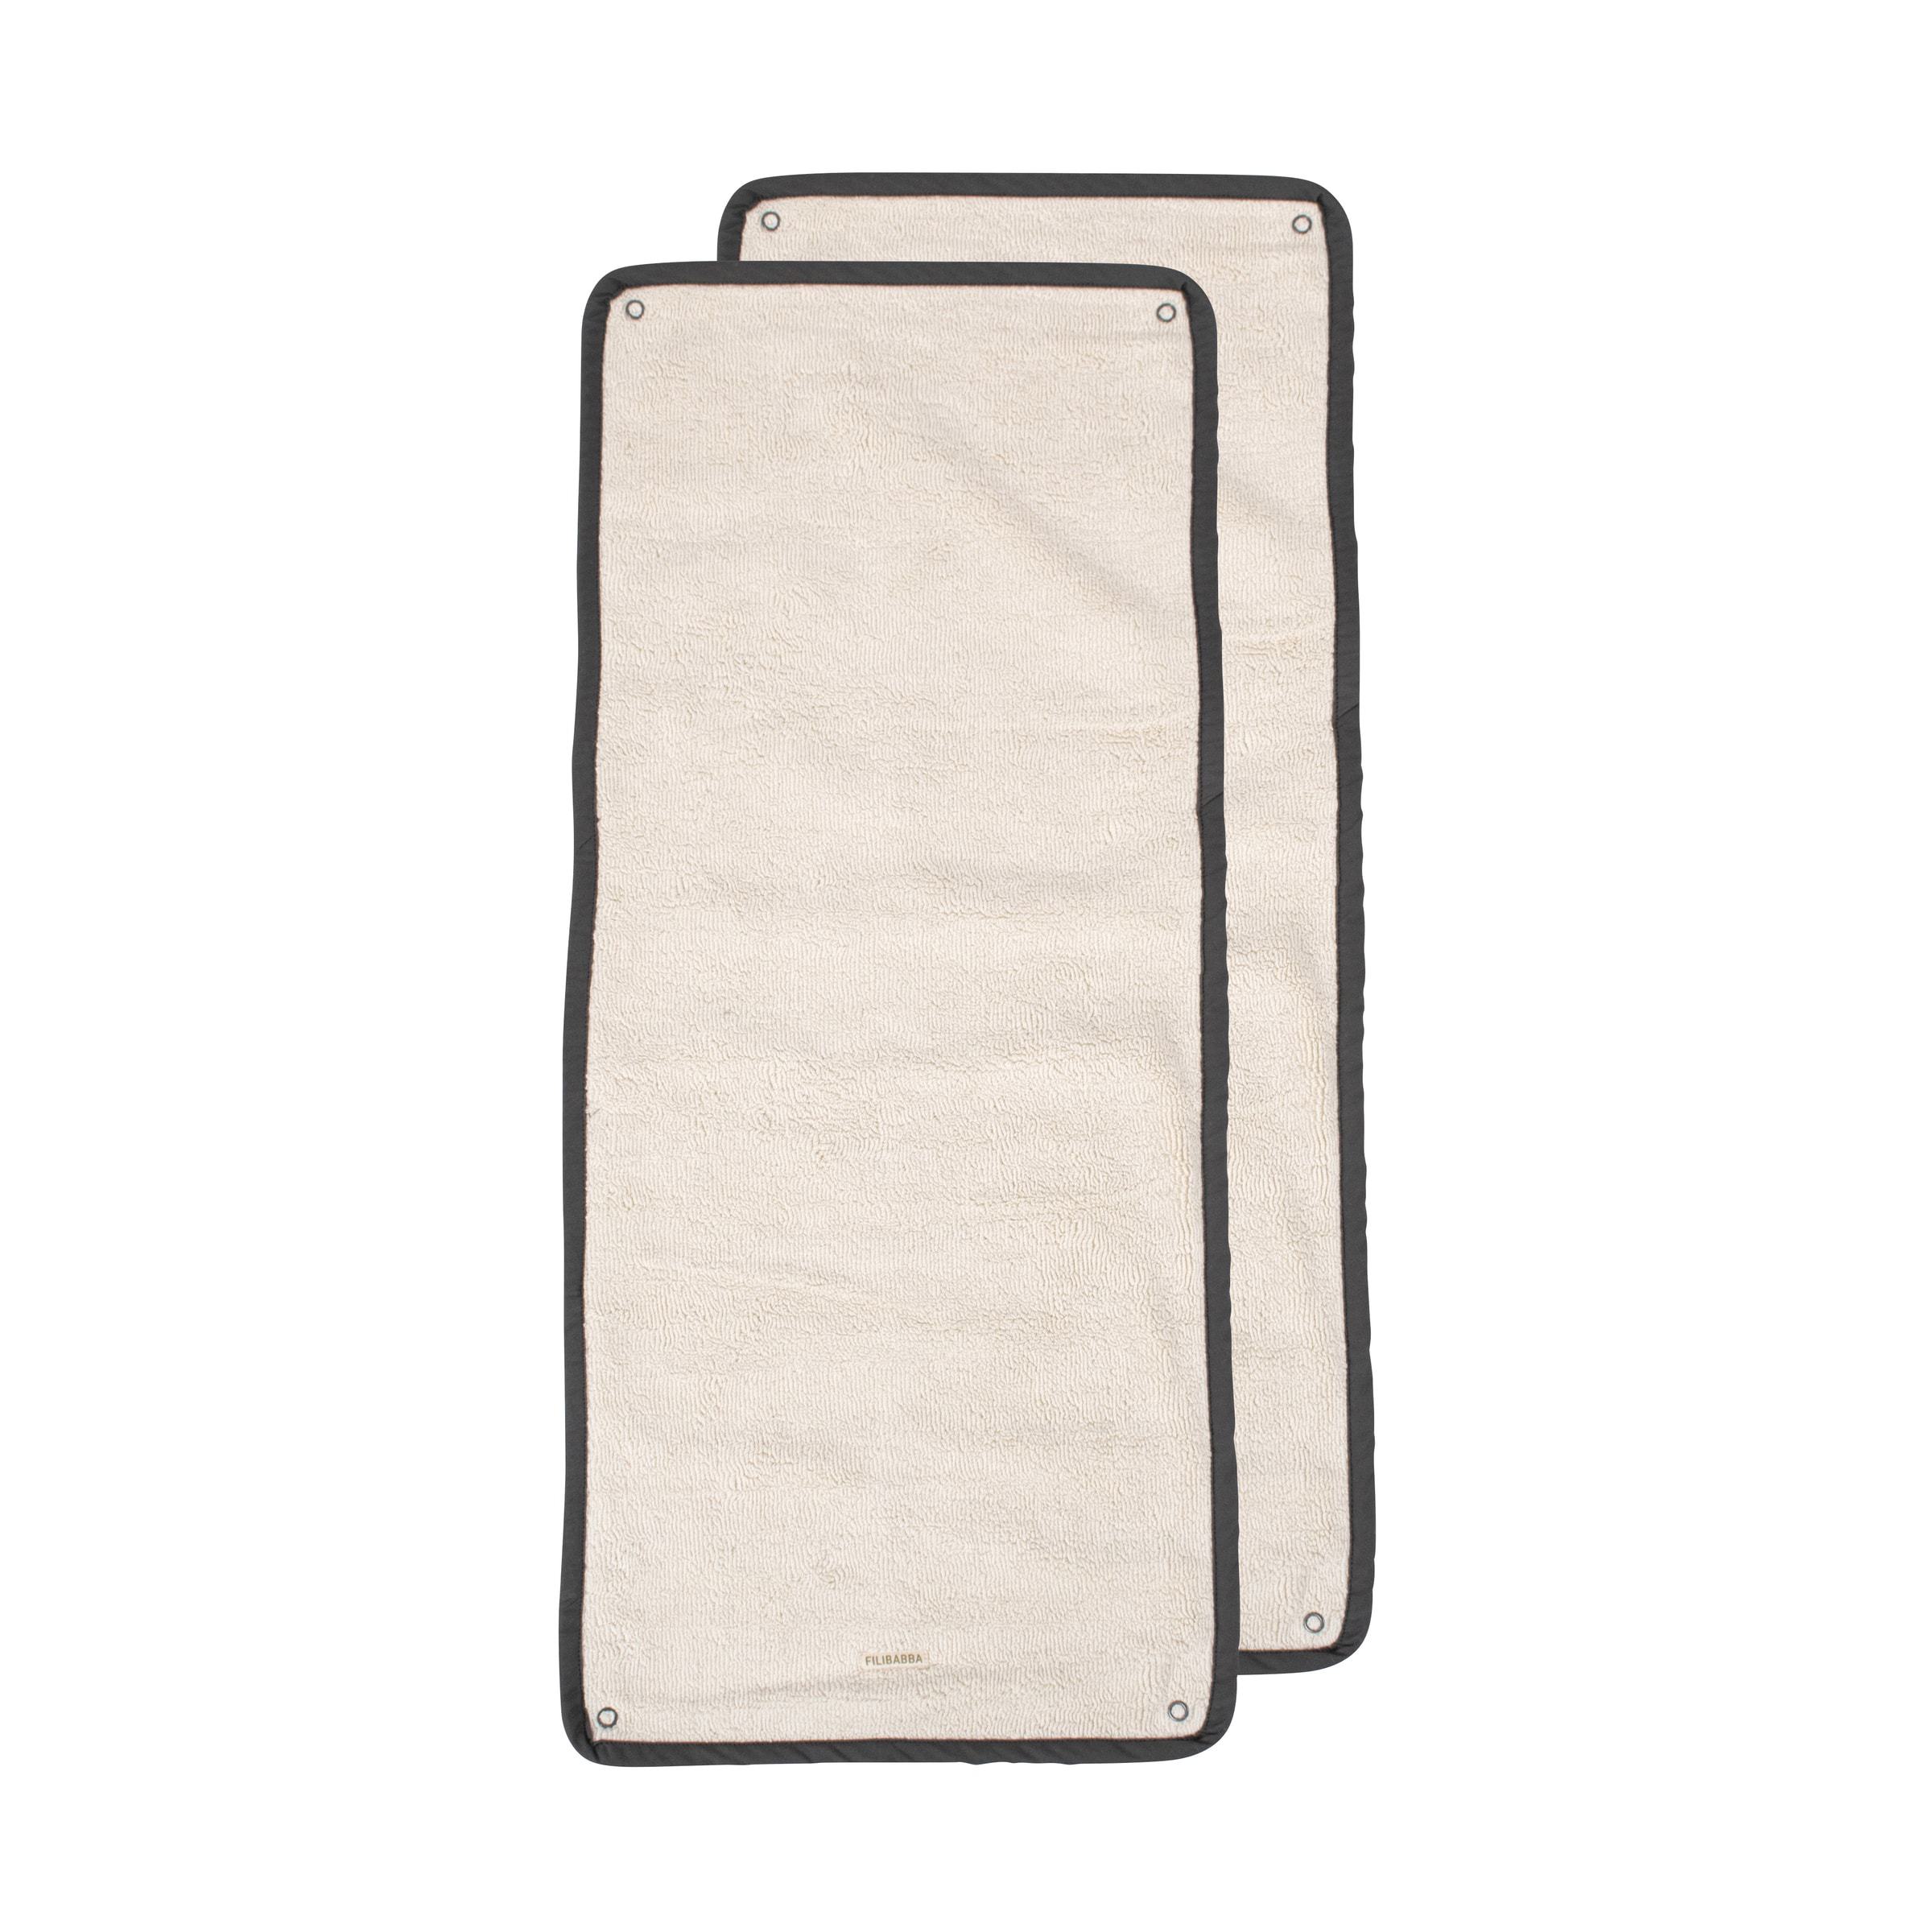 Filibabba - Middle layer 2-pack for Changing Pad  -  Stone grey (FI-CP008)